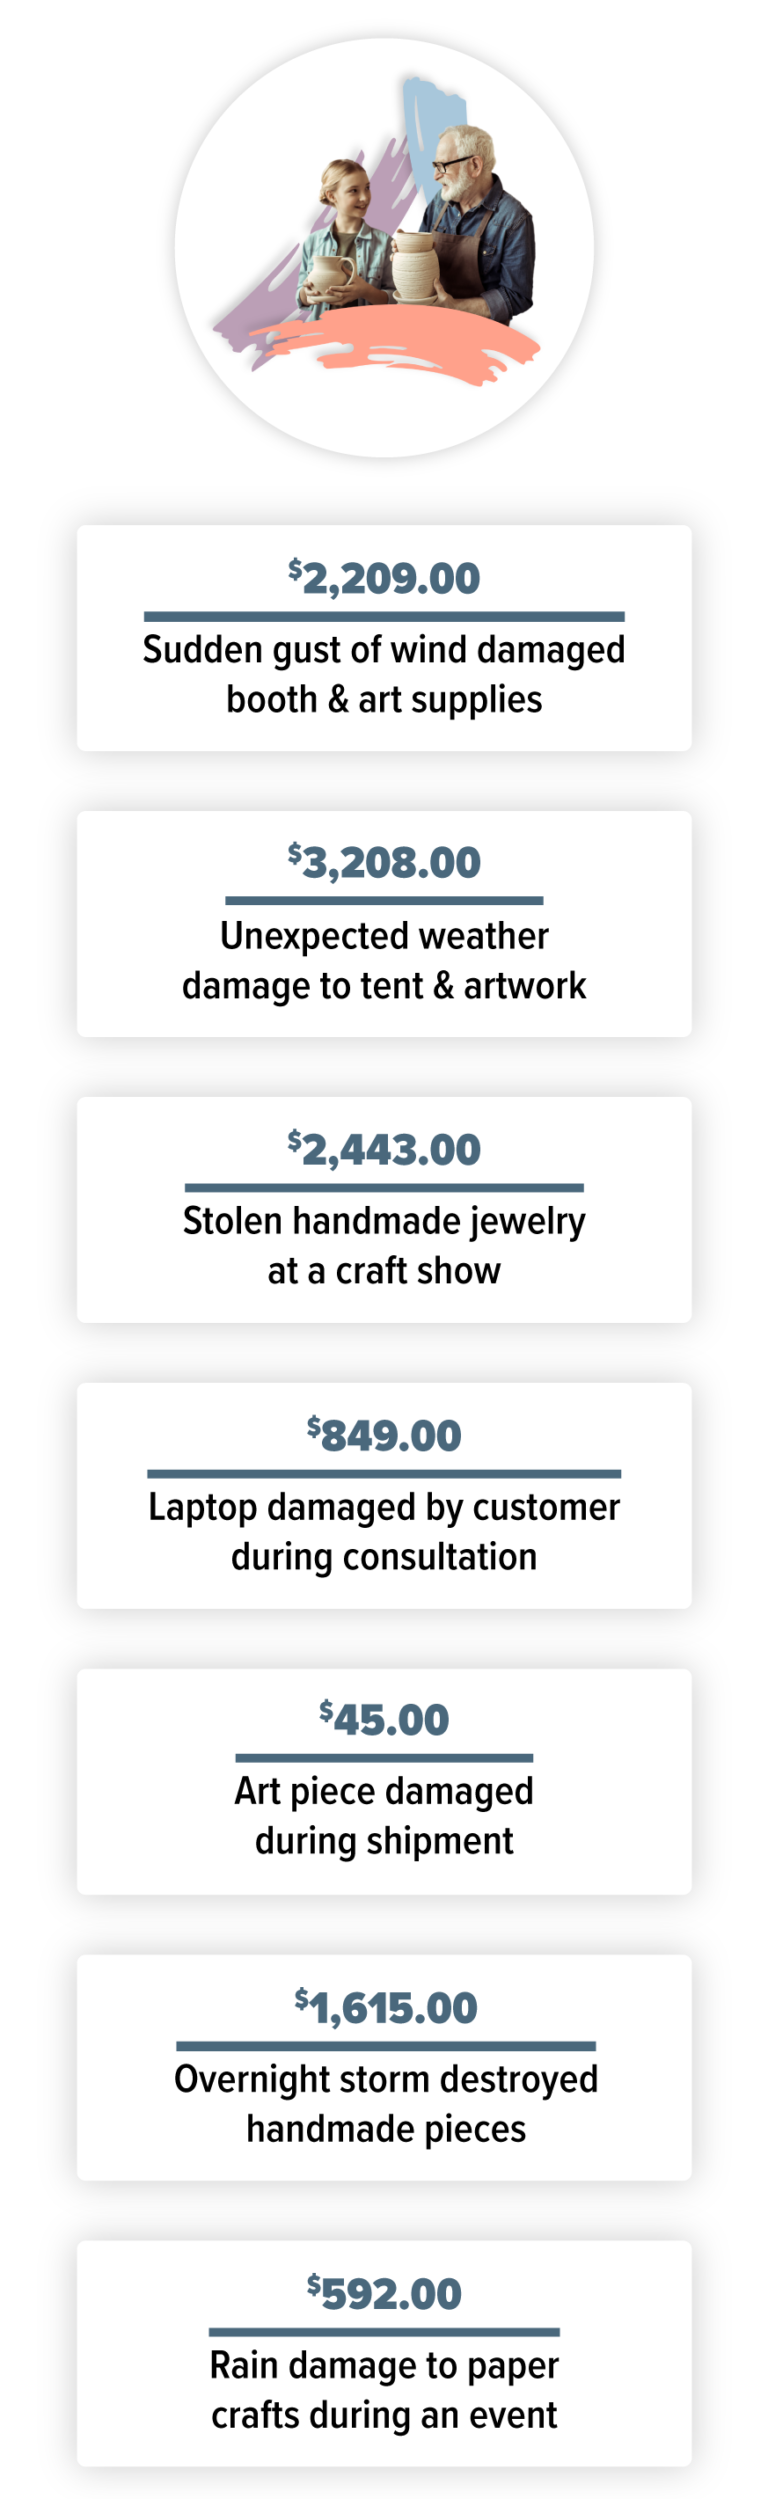 Rain damage to paper crafts during an event = $592.00 Unexpected weather damage to tent & artwork = $3,208.00 Overnight storm destroyed handmade pieces = $1,615.00 Sudden gust of wind damaged booth & art supplies = $2,209.00 Laptop damaged by customer during consultation = $849.00 Stolen handmade jewelry at a craft show = $2,443.00 Art piece damaged during shipment = $45.00